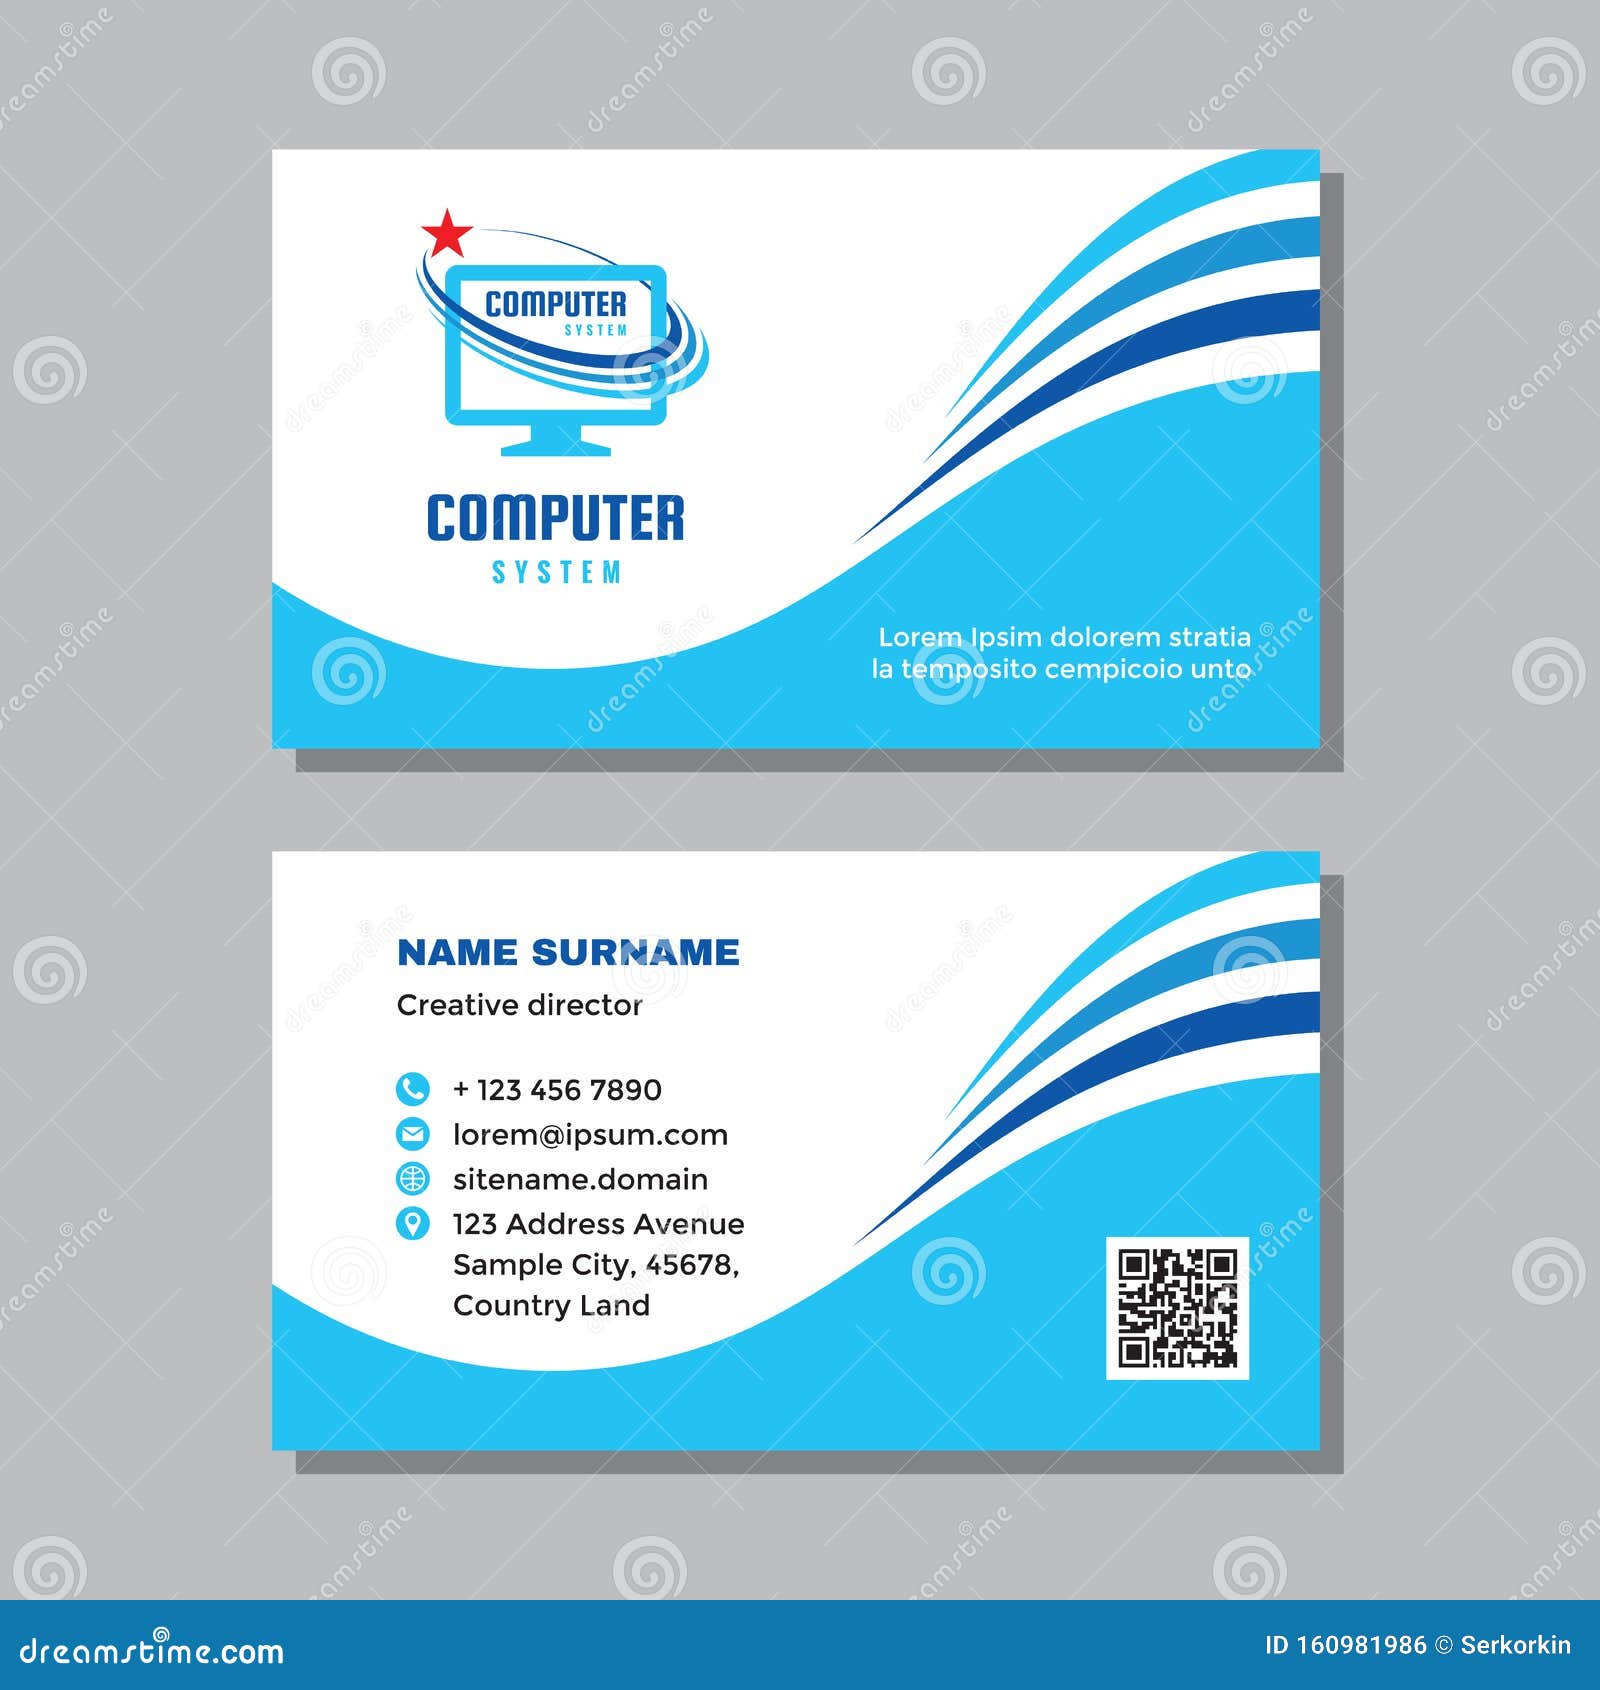 Business Visit Card Template with Logo - Concept Design. Computer With Free Business Cards Templates For Word